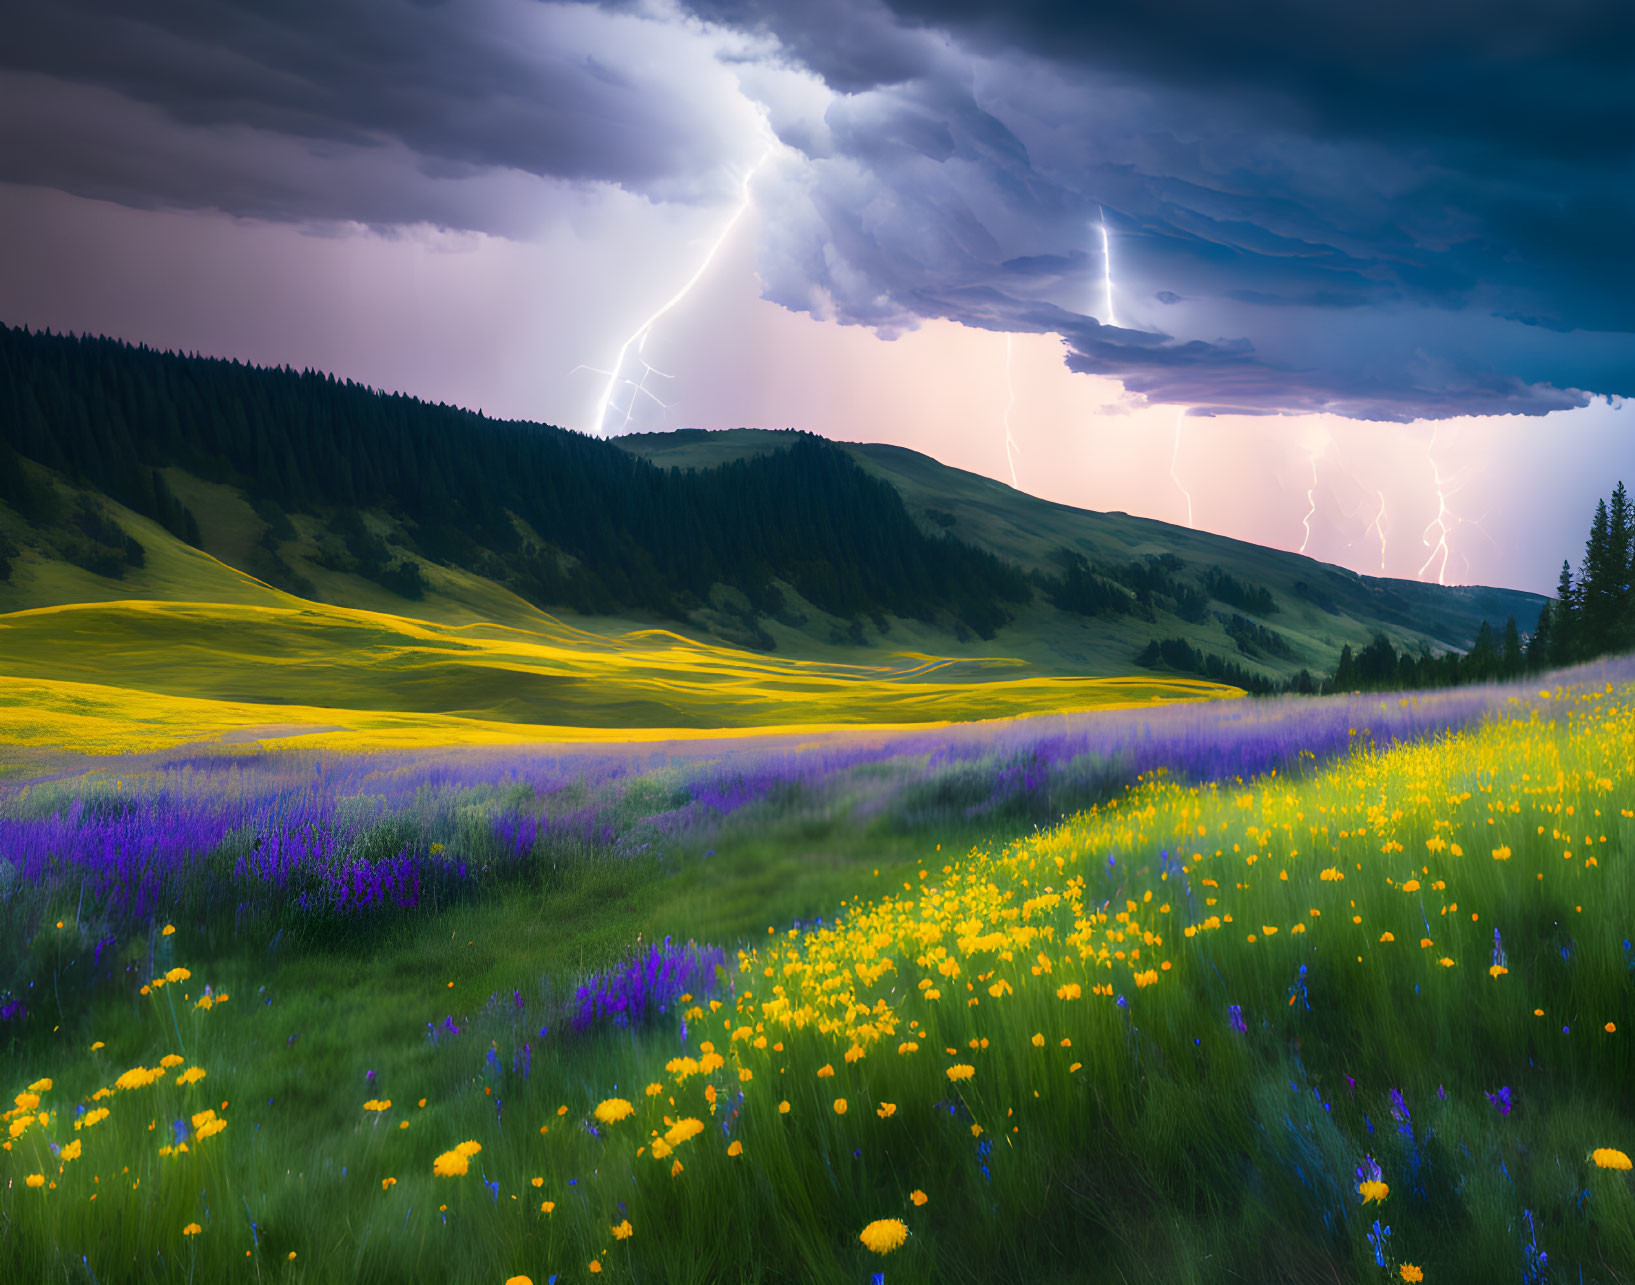 Scenic landscape with yellow and purple wildflowers under dramatic sky